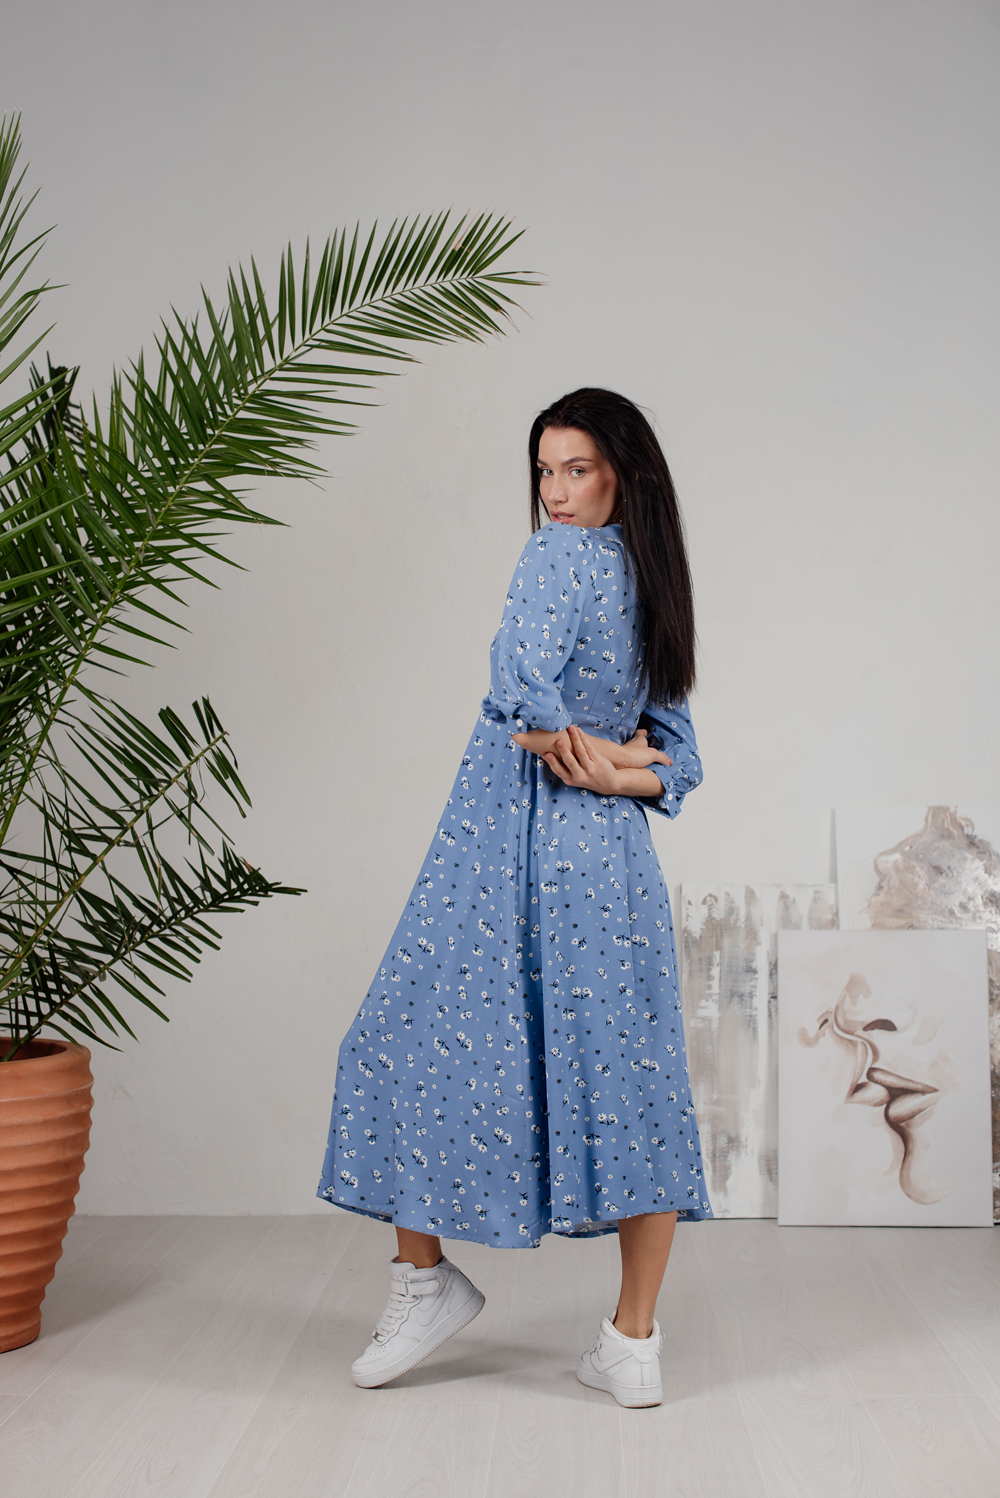 Blue floral print long dress with puffed skirt